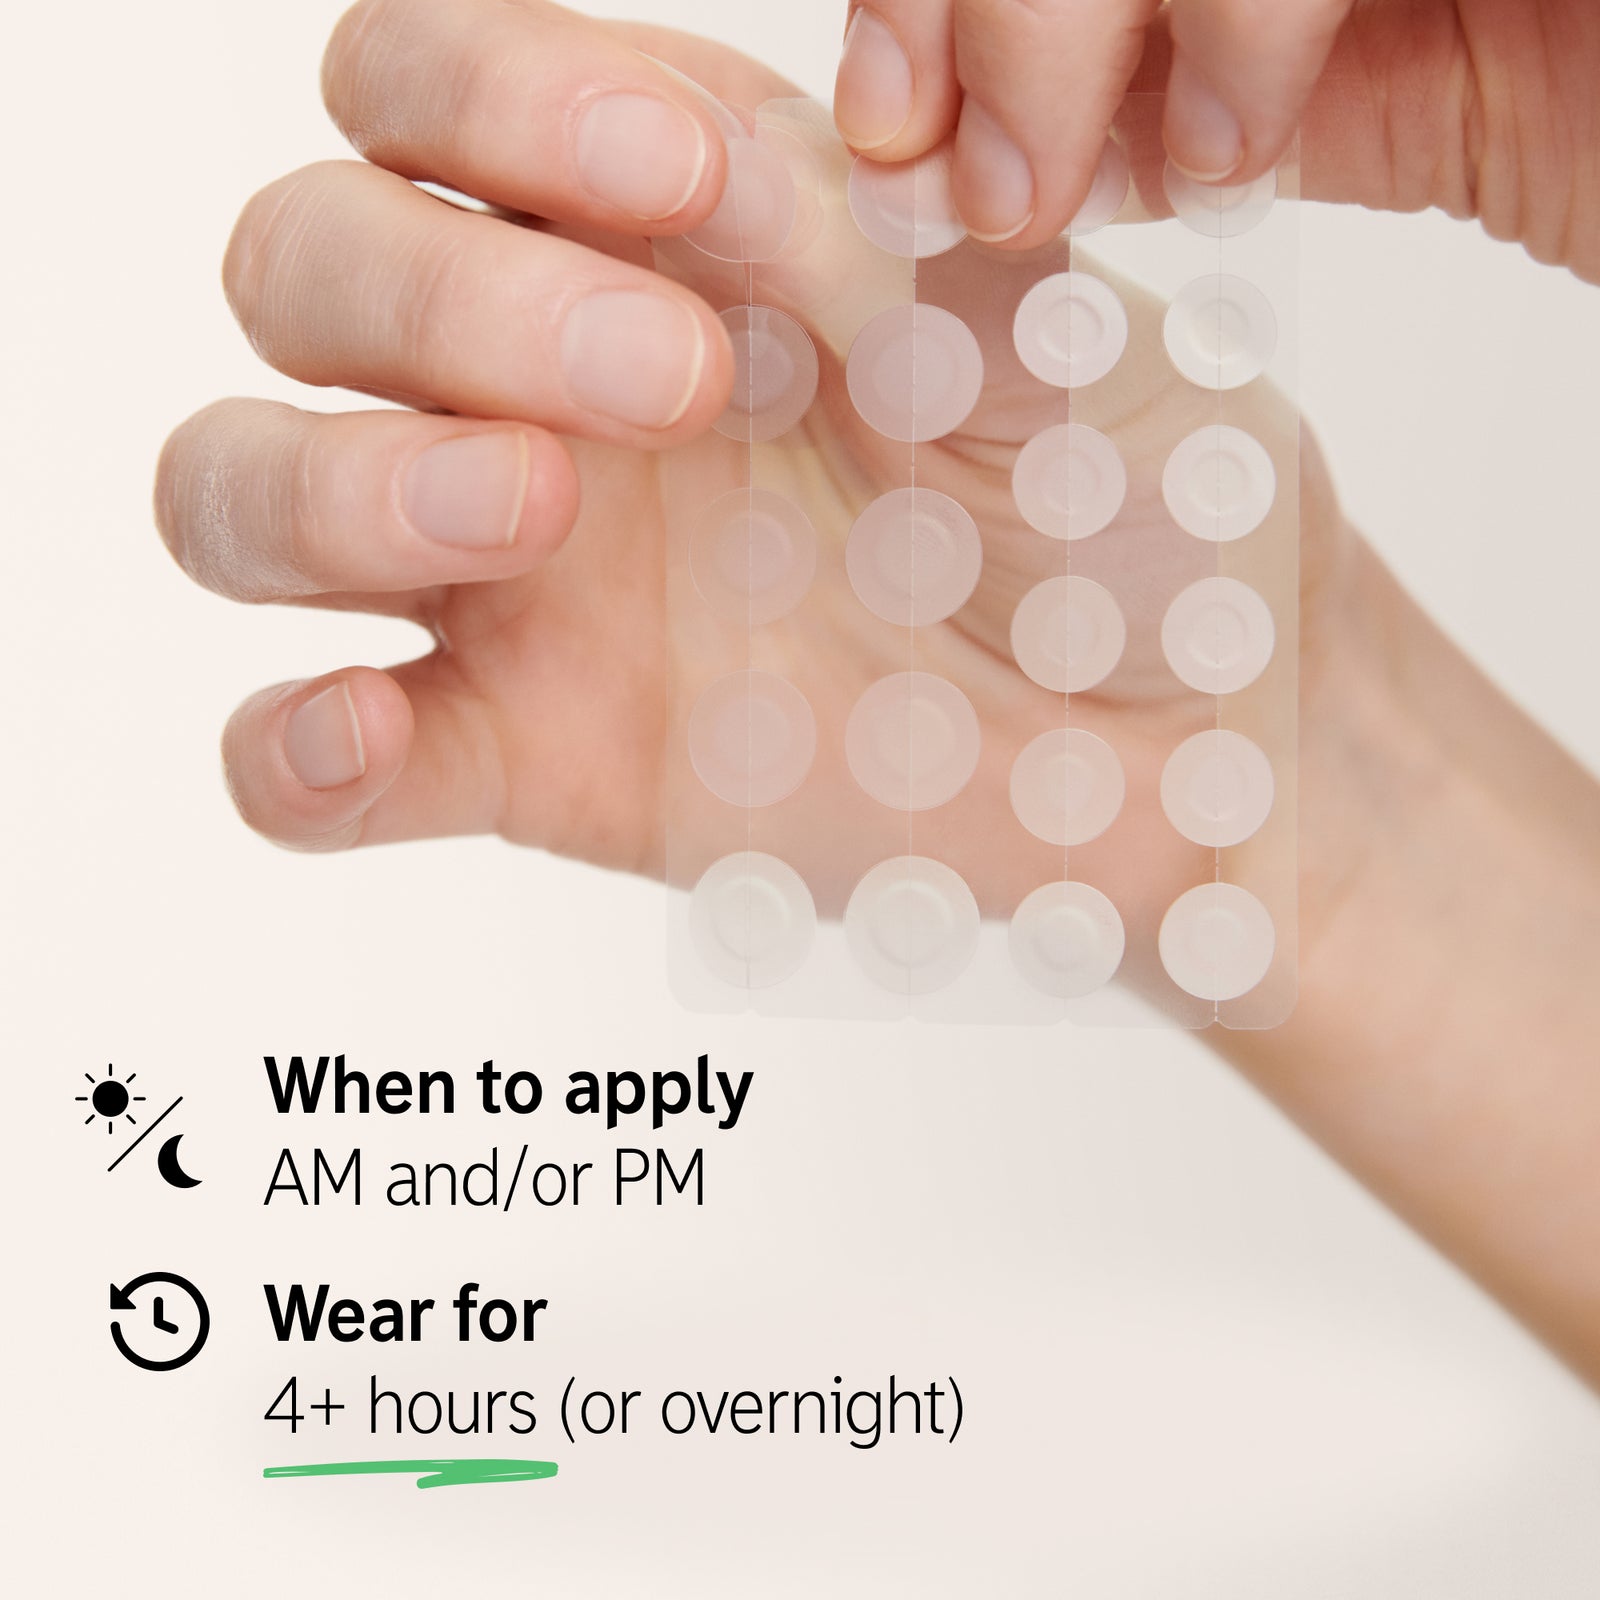 When to apply: AM and/or PM, wear for 4+ hours or overnight